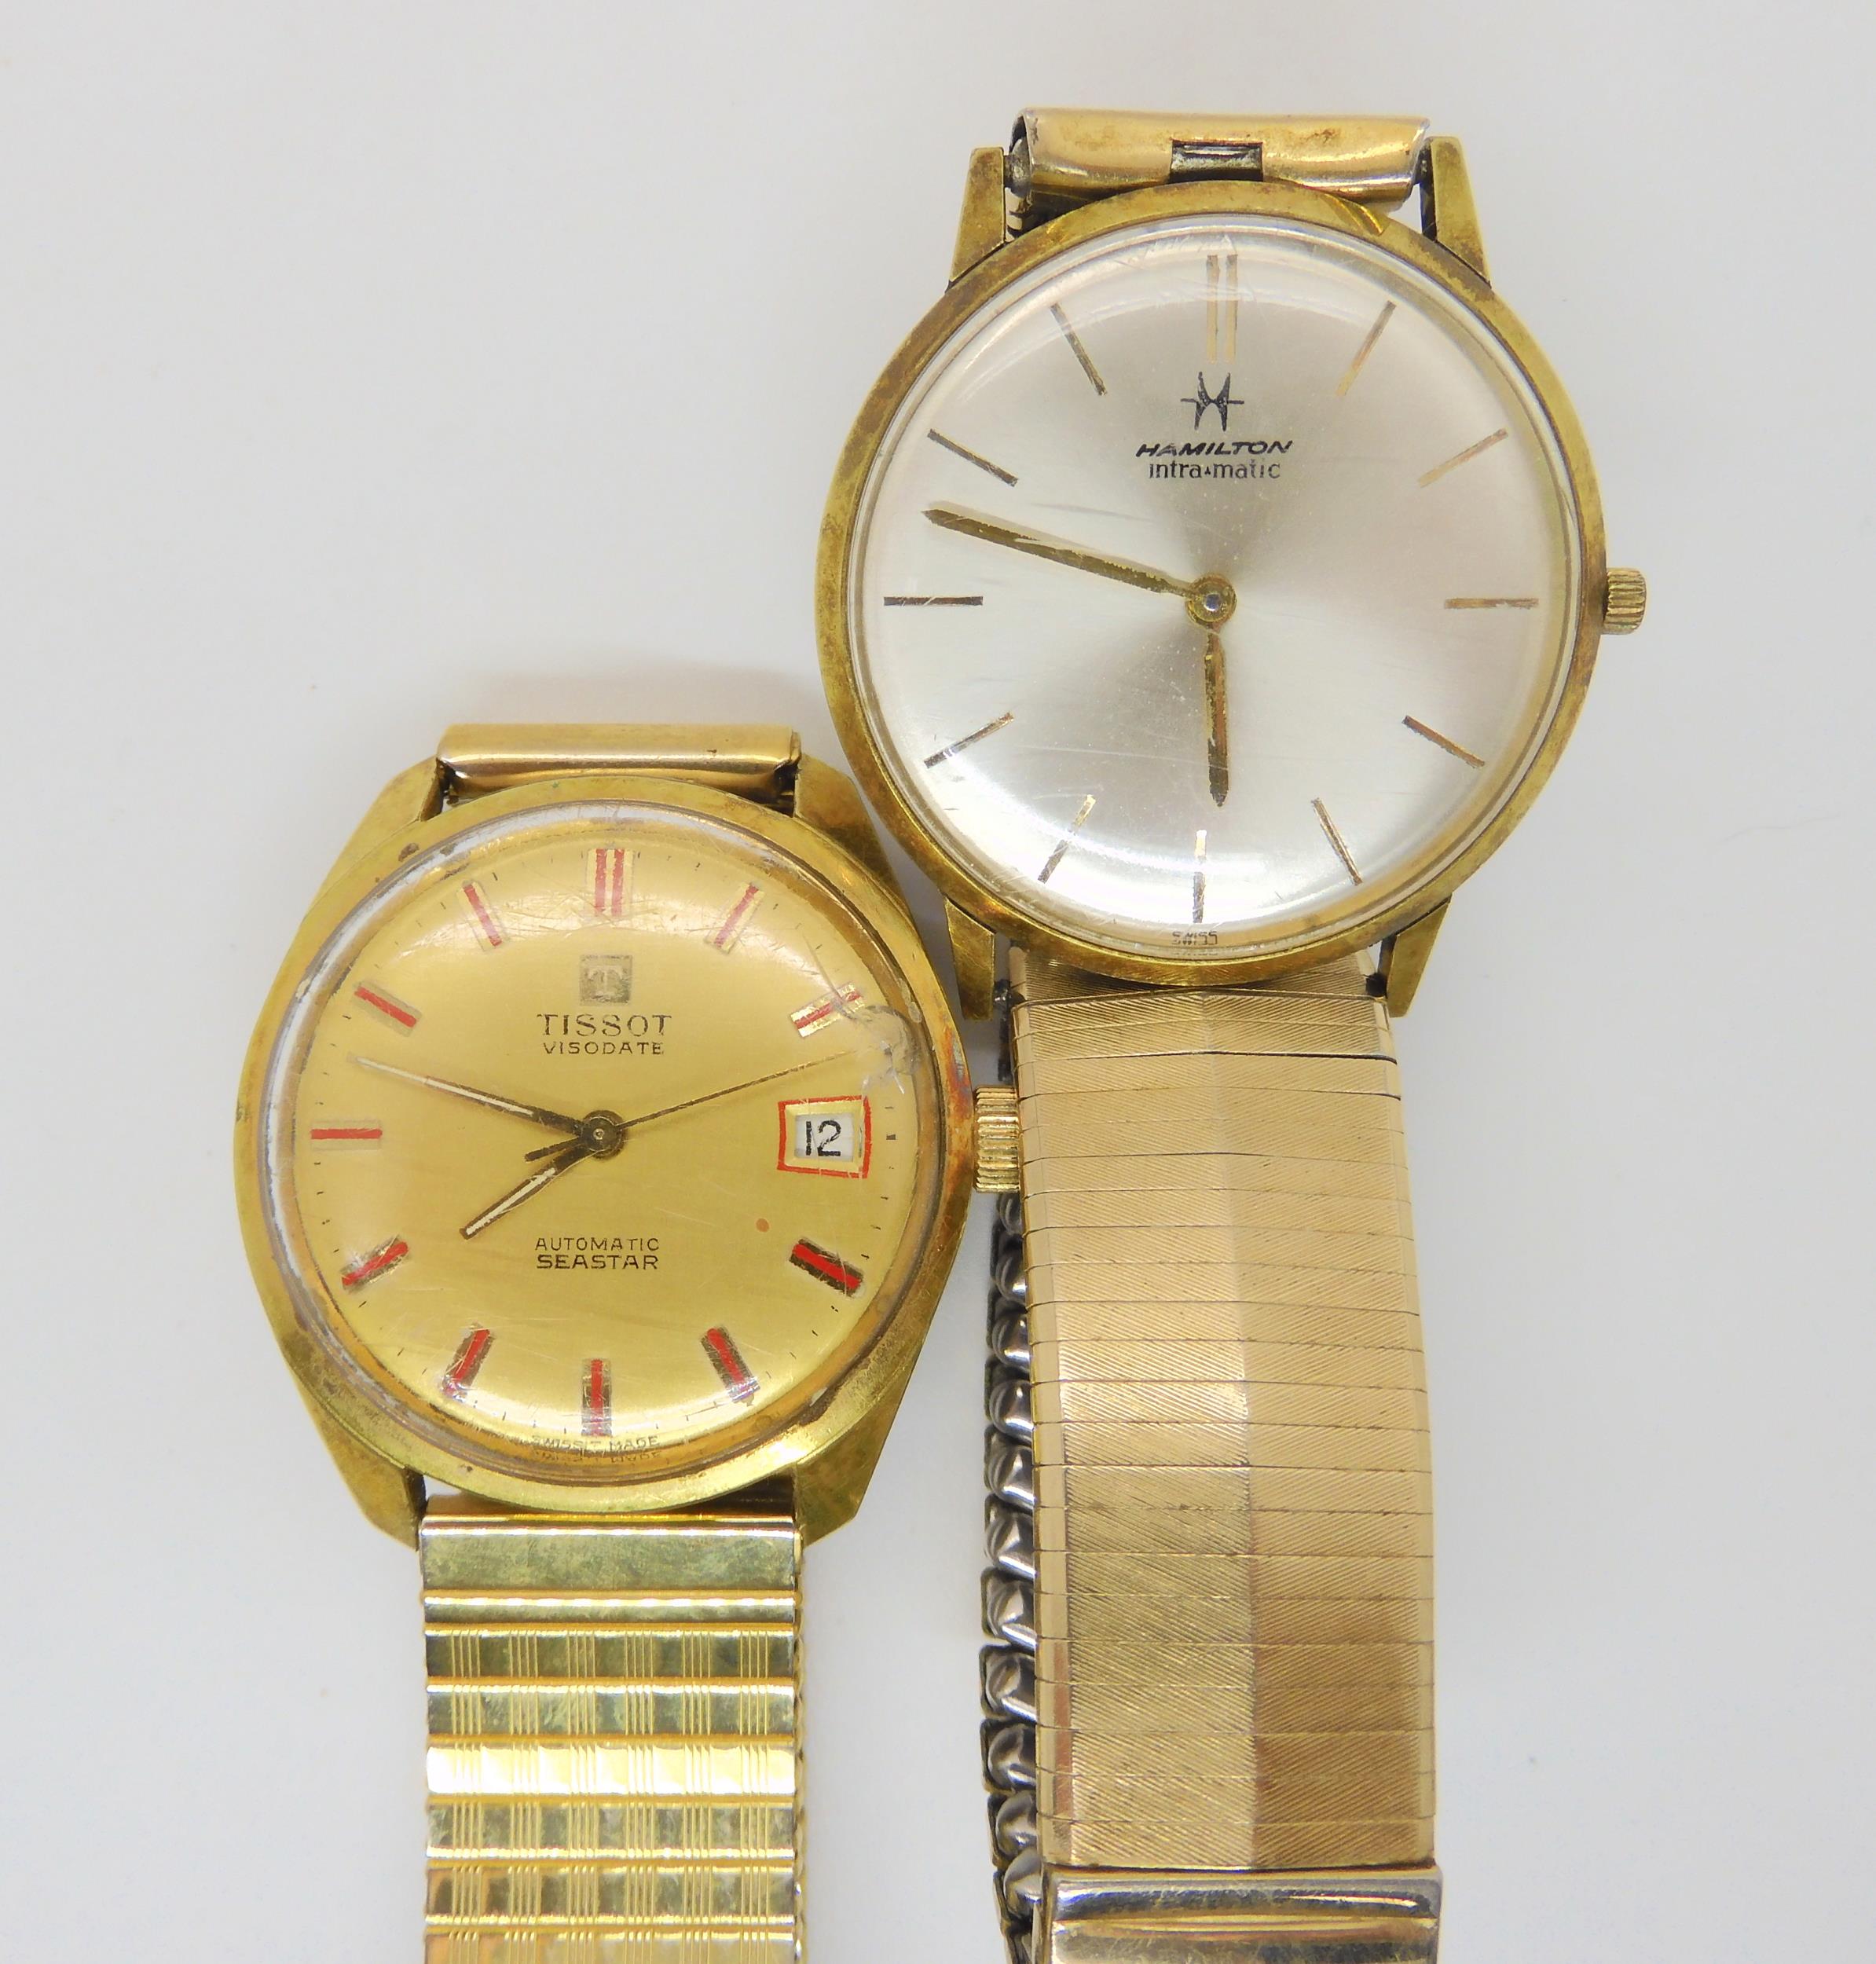 A gold plated Hamilton Intra-matic, together with a Tissot Visodate Seastar Automatic Condition